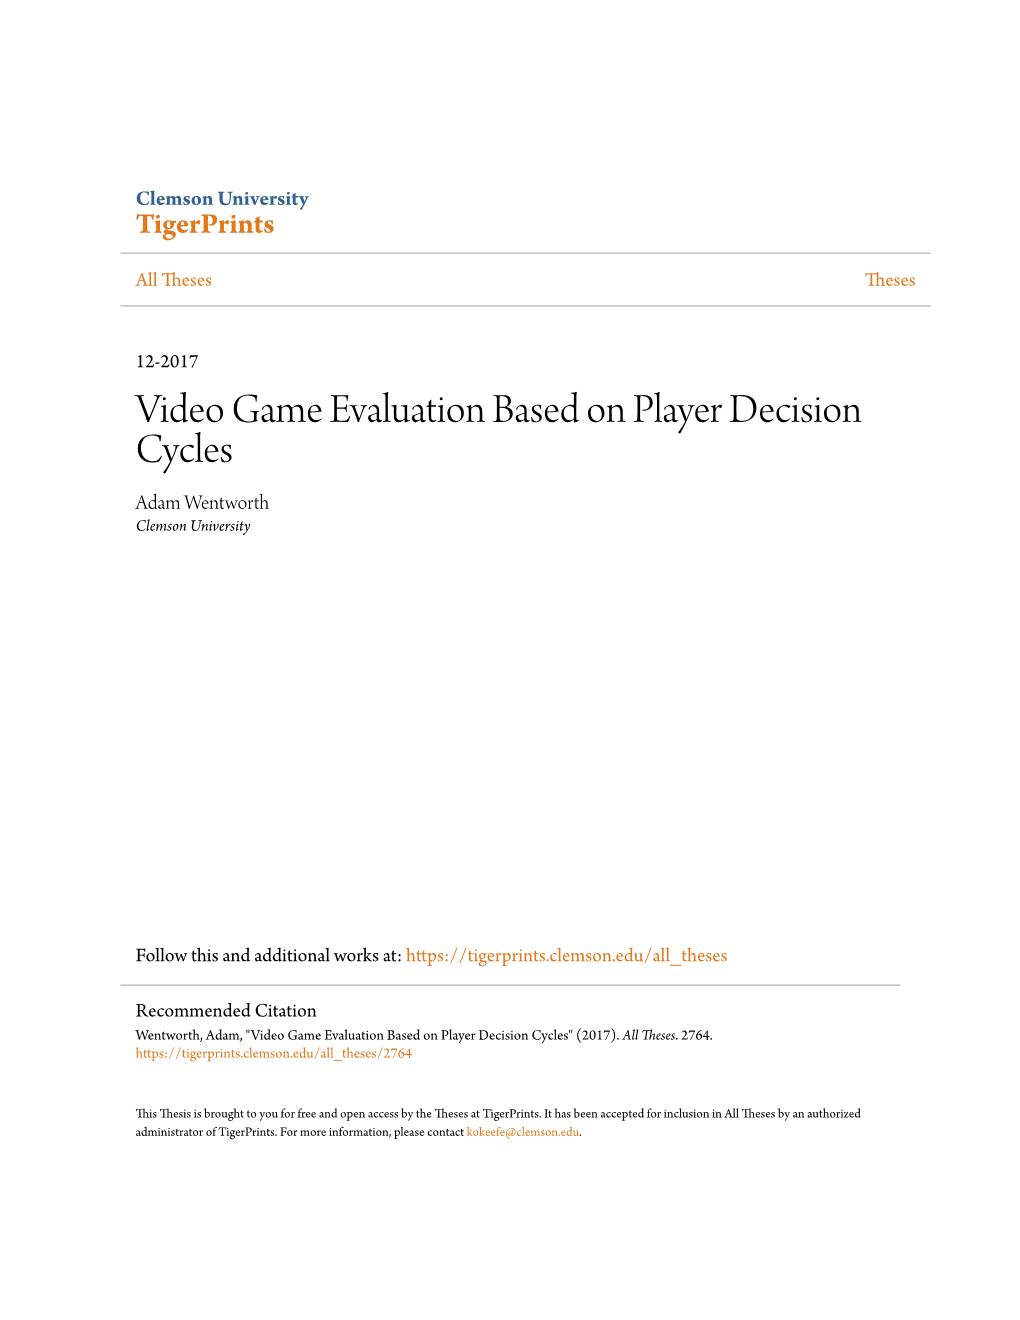 Video Game Evaluation Based on Player Decision Cycles Adam Wentworth Clemson University